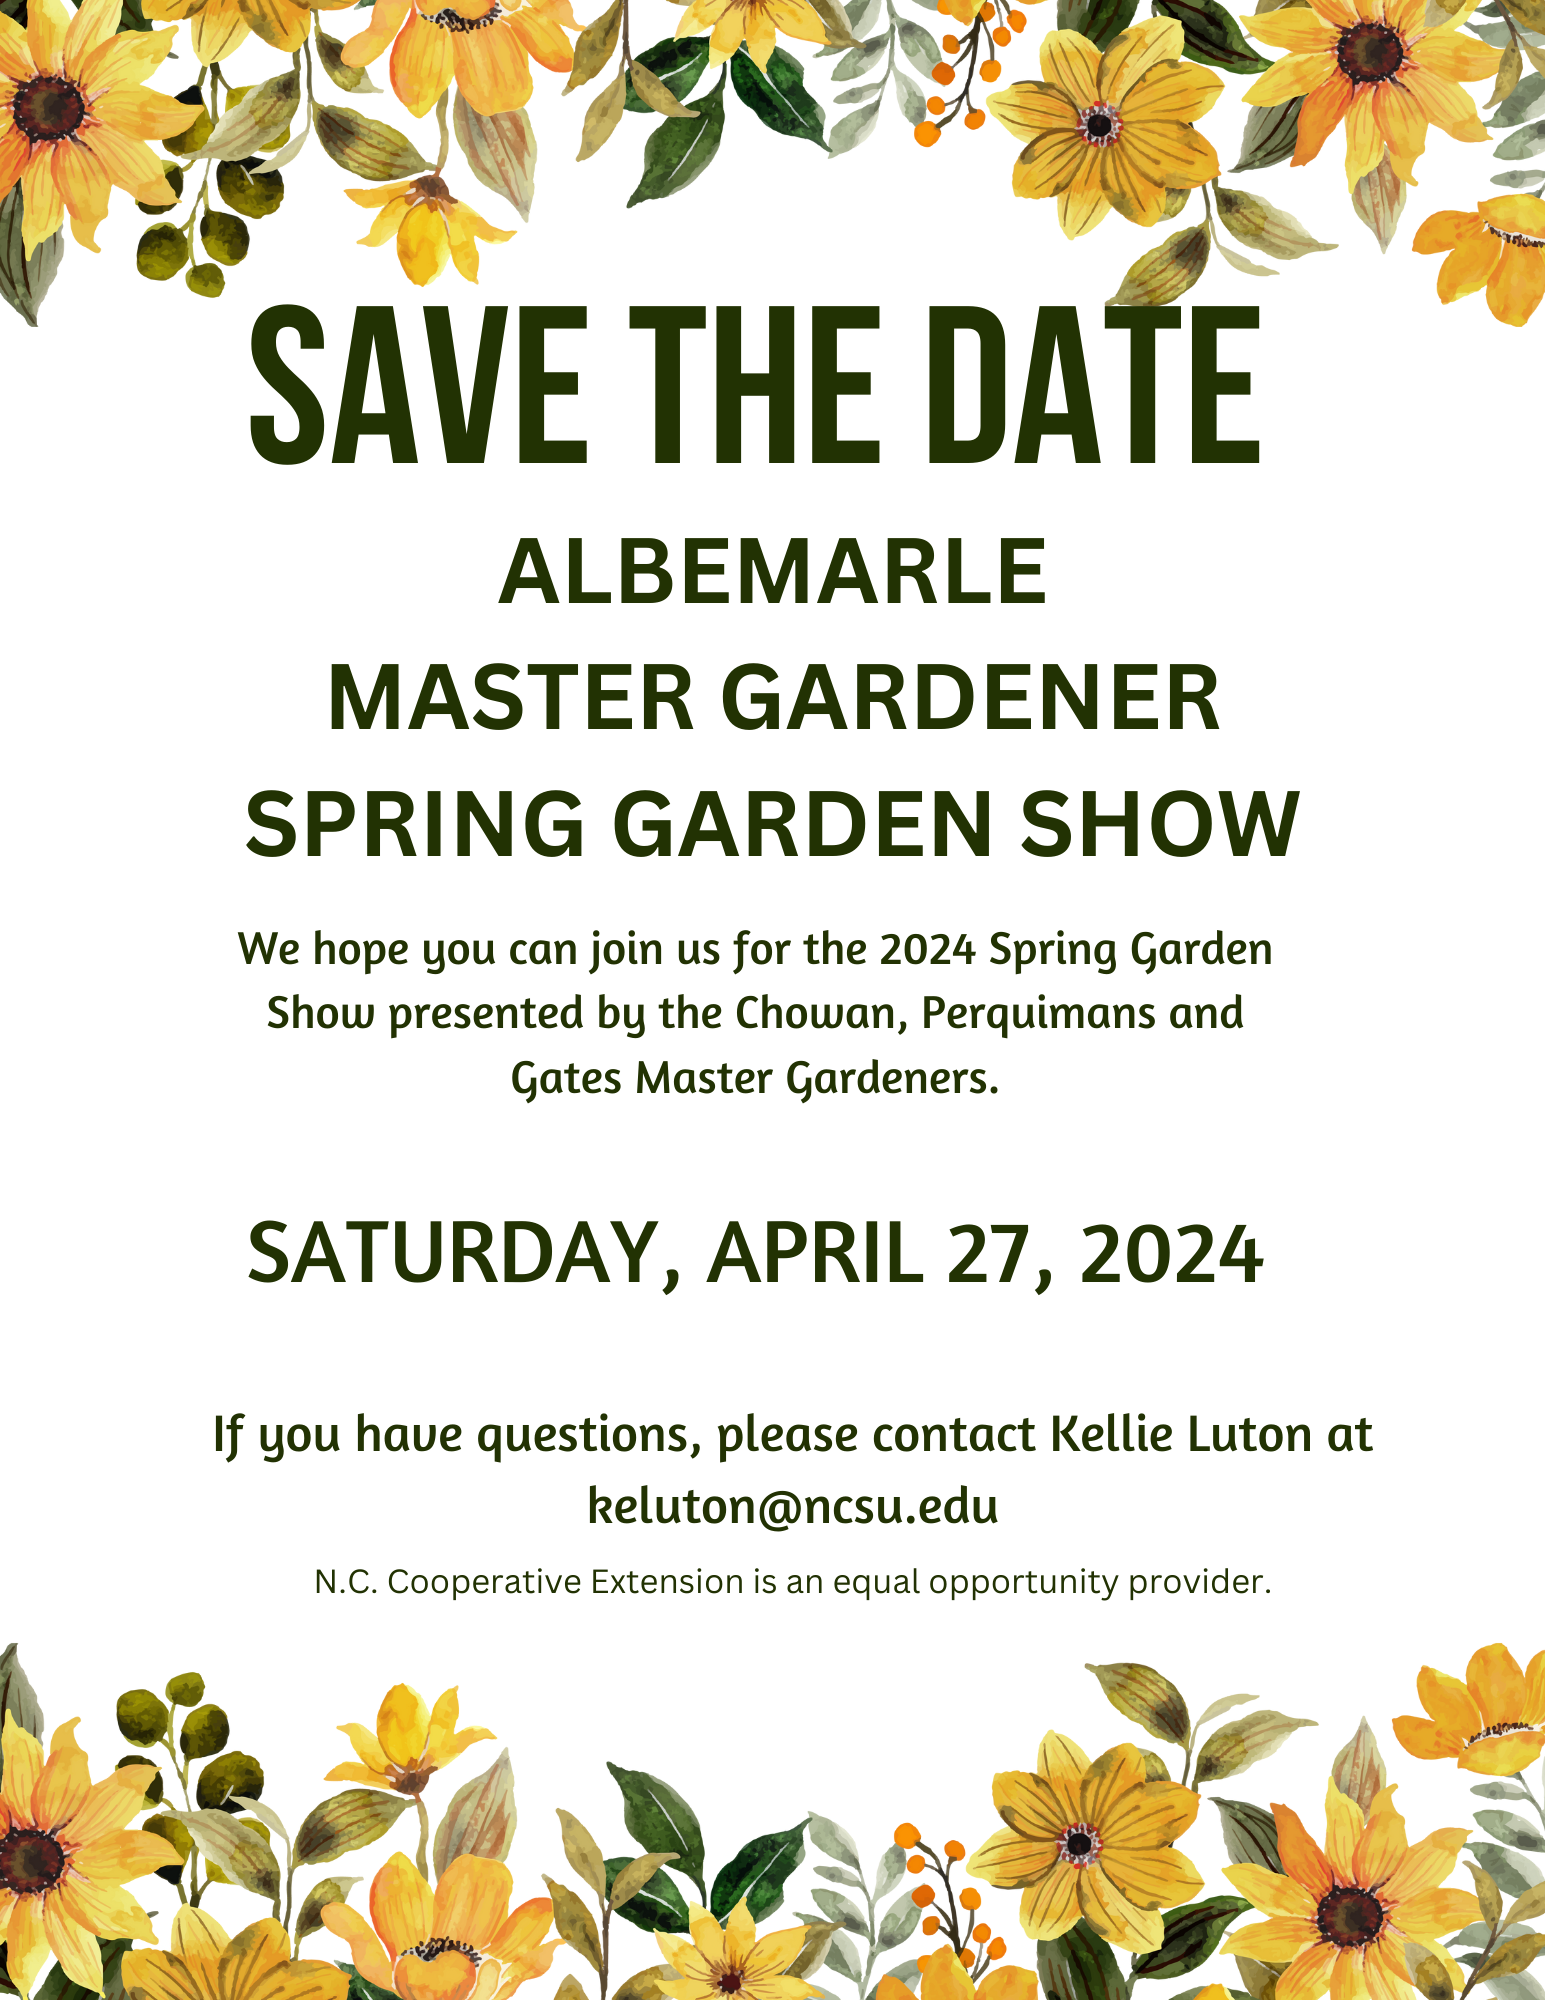 Spring Garden Show Save the Date